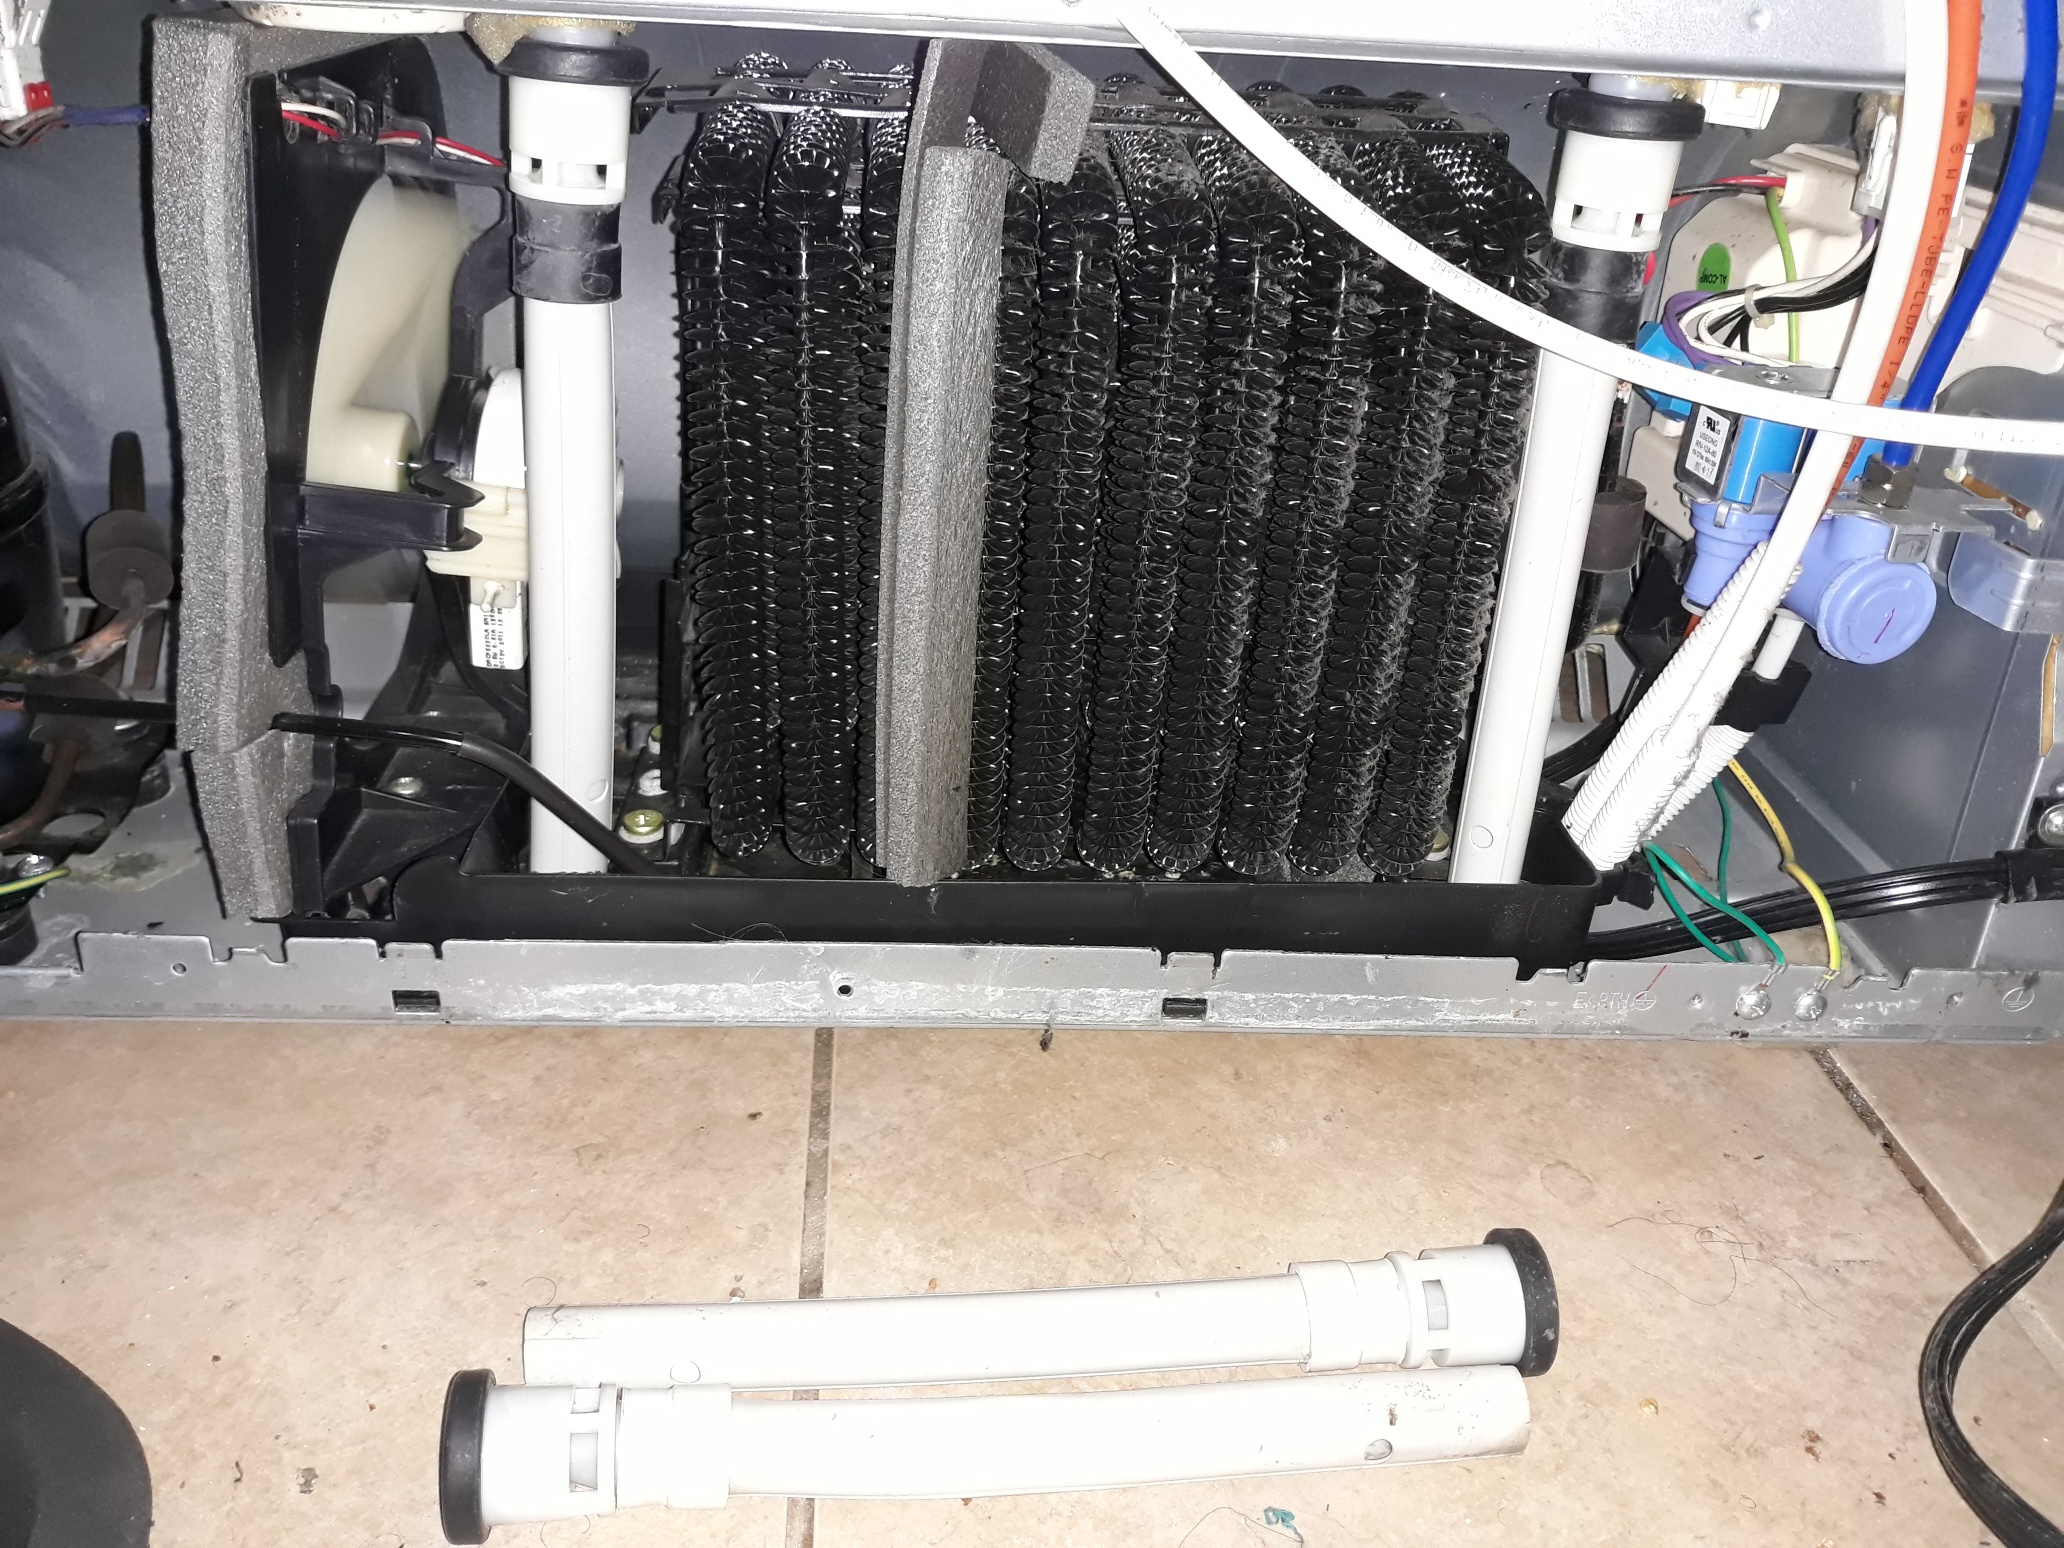 appliance repair refrigerator repair replacement of the old design drains with the new upgraded drains se 96th chapelwood cir the villages fl 32162